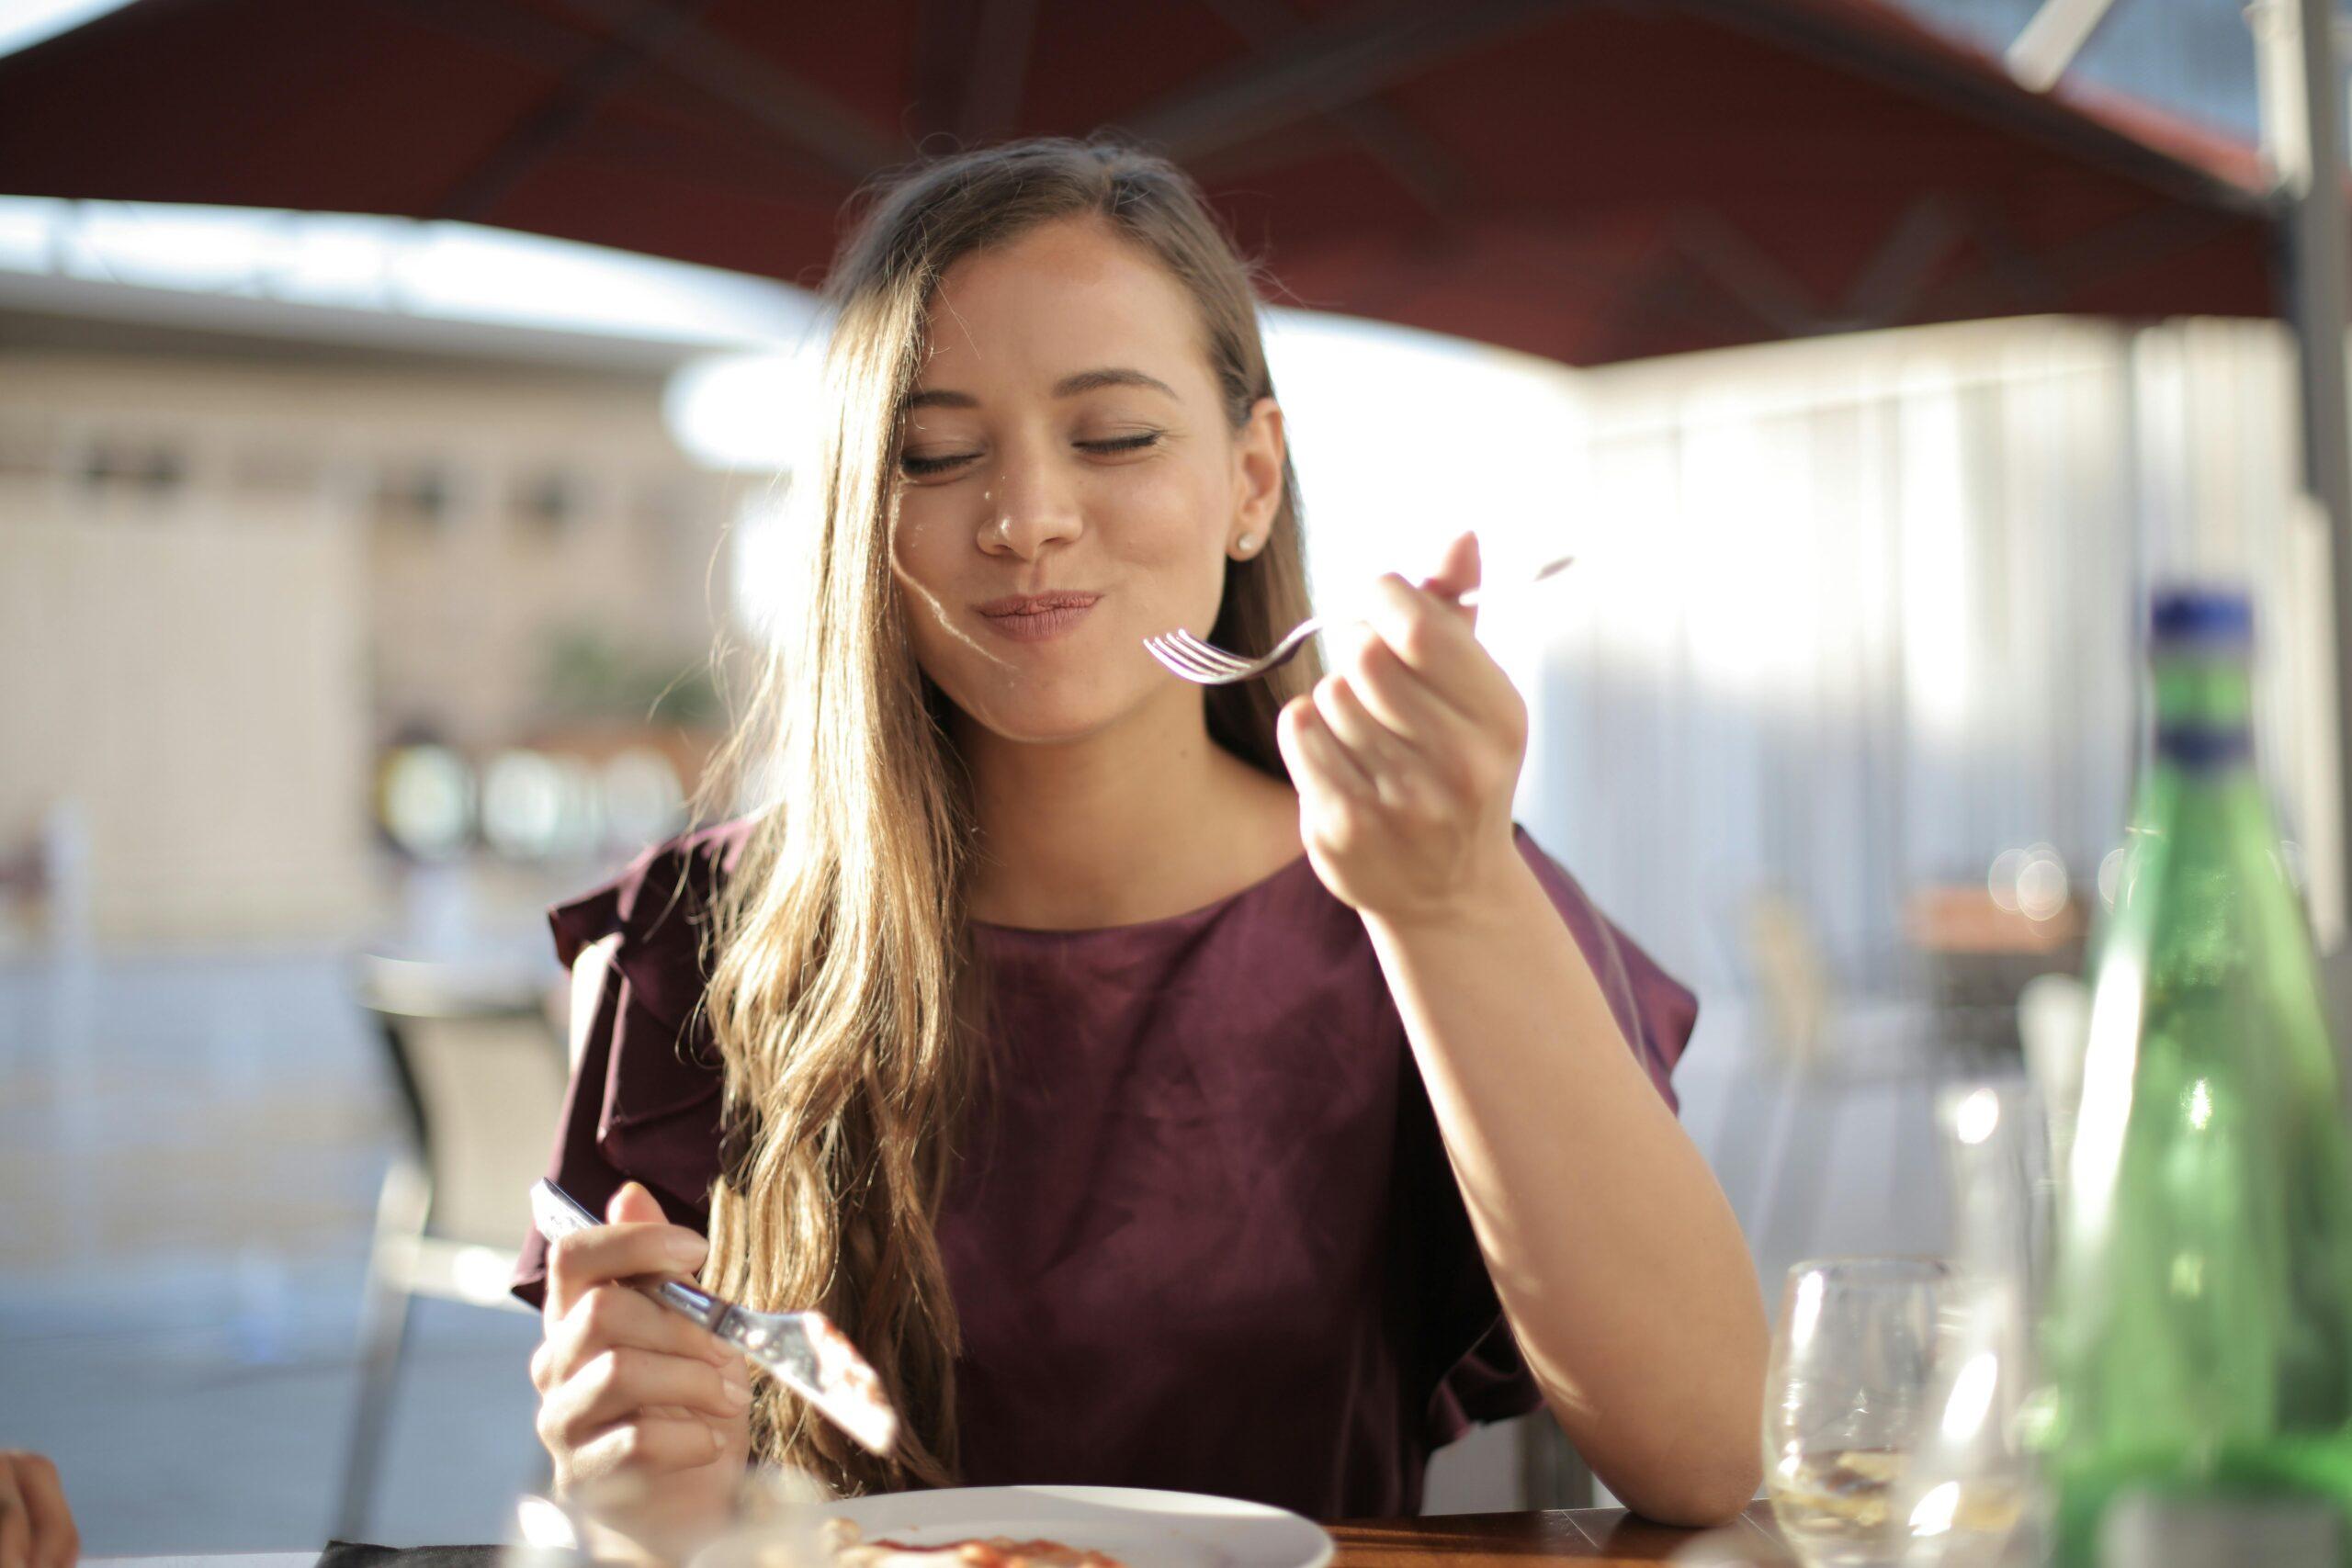 woman eating with fork and knife outdoors